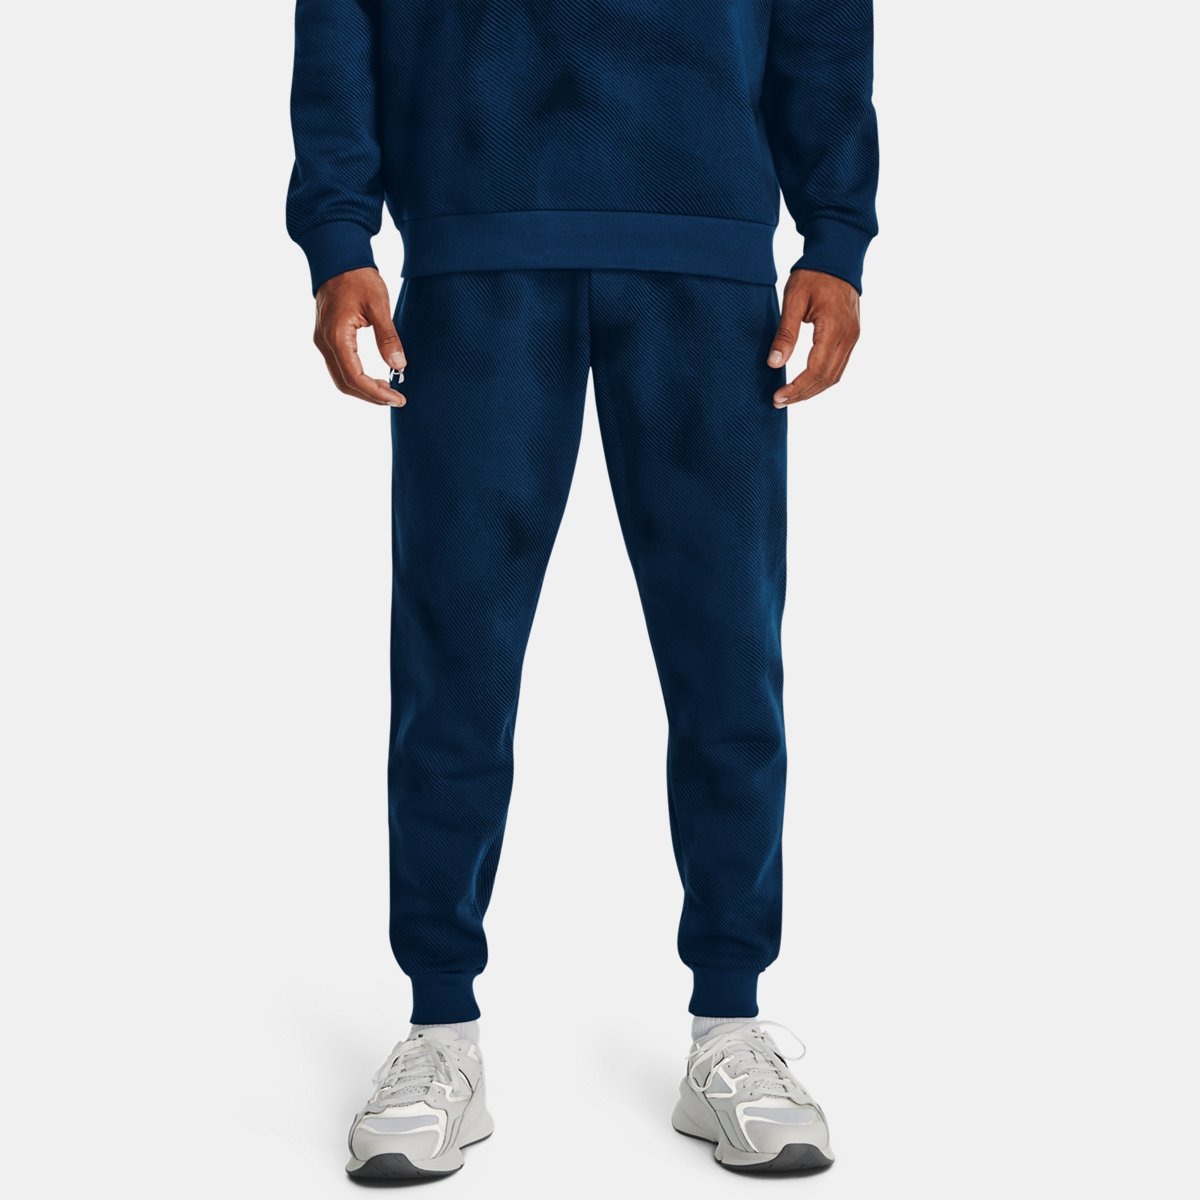 Gents Joggers in Blue at Under Armour GOOFASH